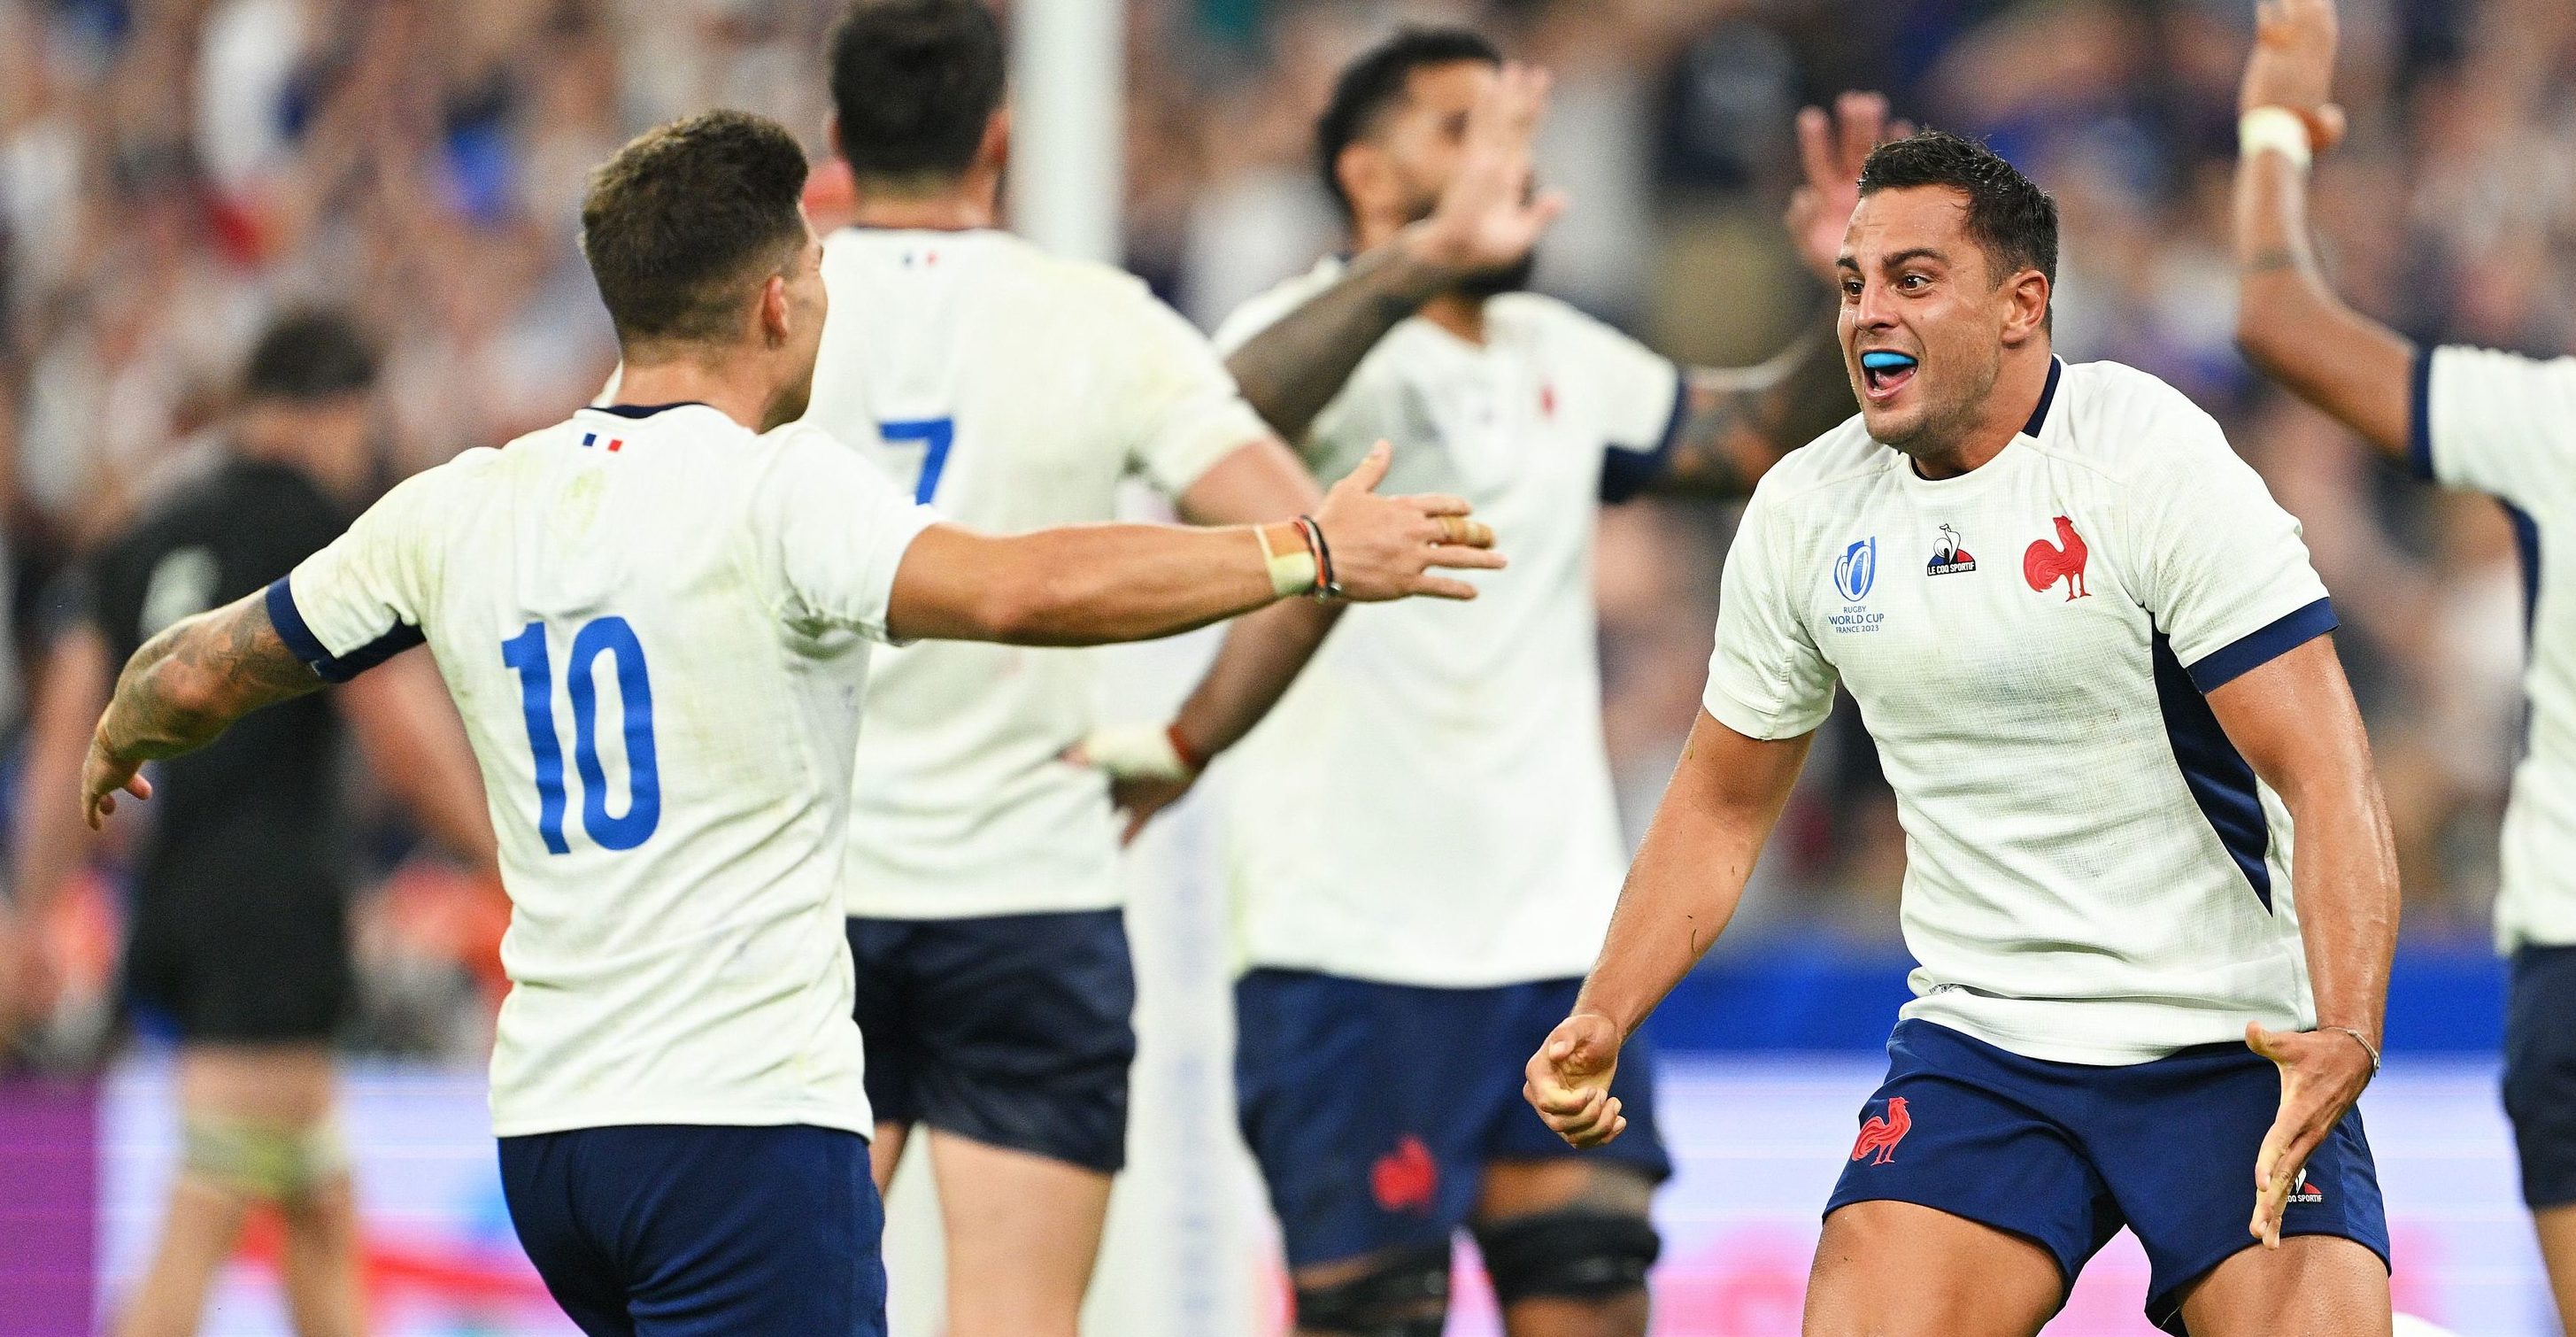 PARIS, FRANCE - SEPTEMBER 08: Matthieu Jalibert and Arthur Vincent of France celebrate victory at full-time following the Rugby World Cup France 2023 Pool A match between France and New Zealand at Stade de France on September 08, 2023 in Paris, France. (Photo by David Ramos - World Rugby/World Rugby via Getty Images)